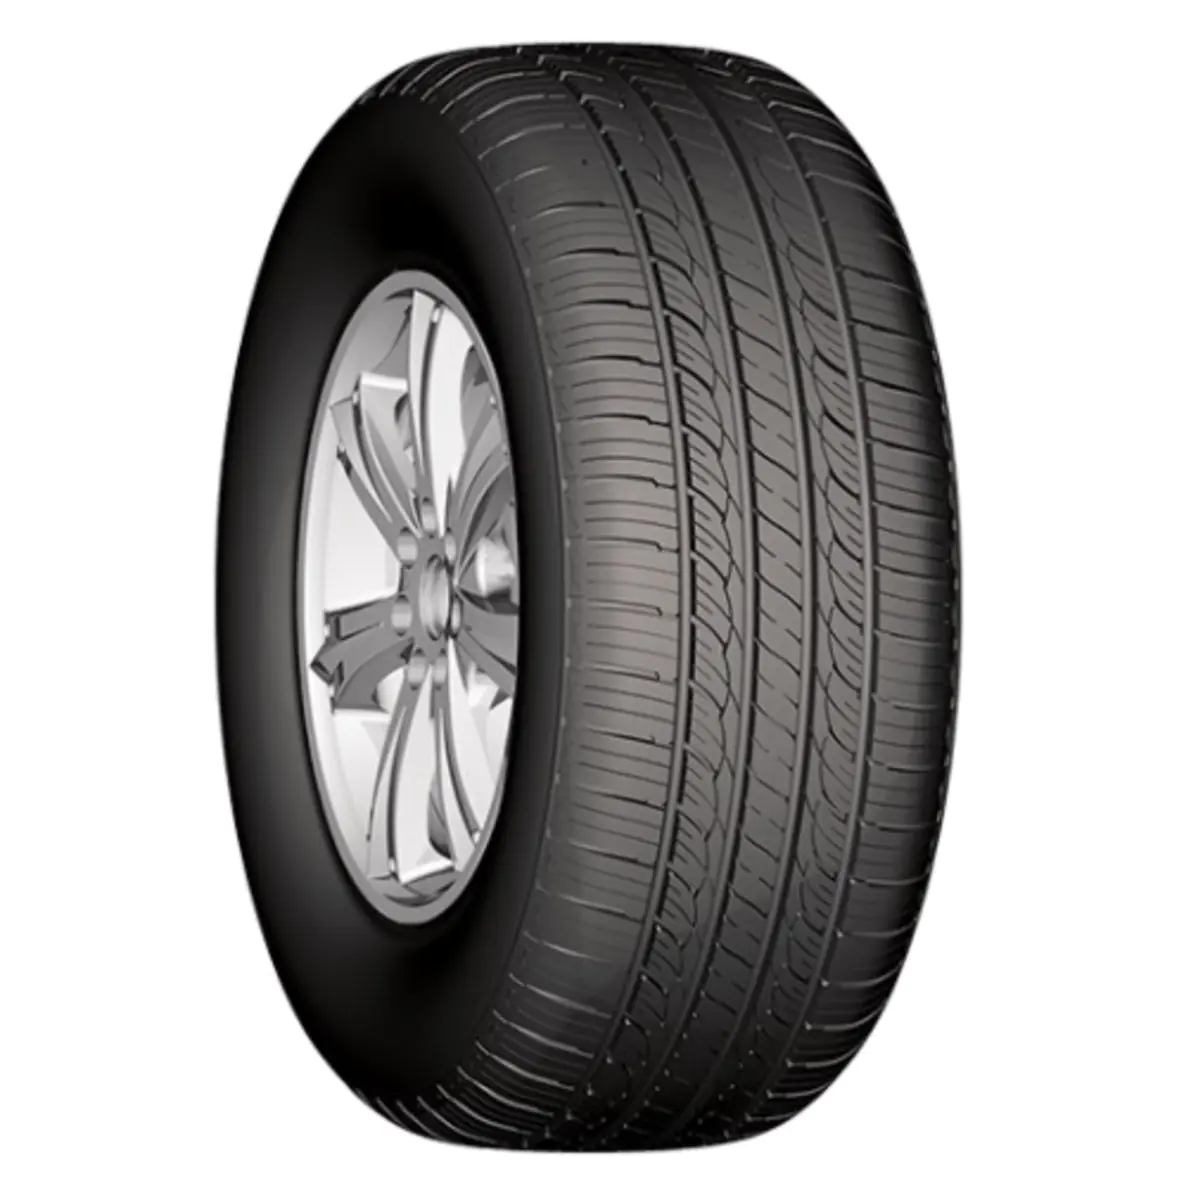 Gomme Autovettura Windforce 215/55 R16 97V CATCHFORS A/S 4STAG XL M+S All Season